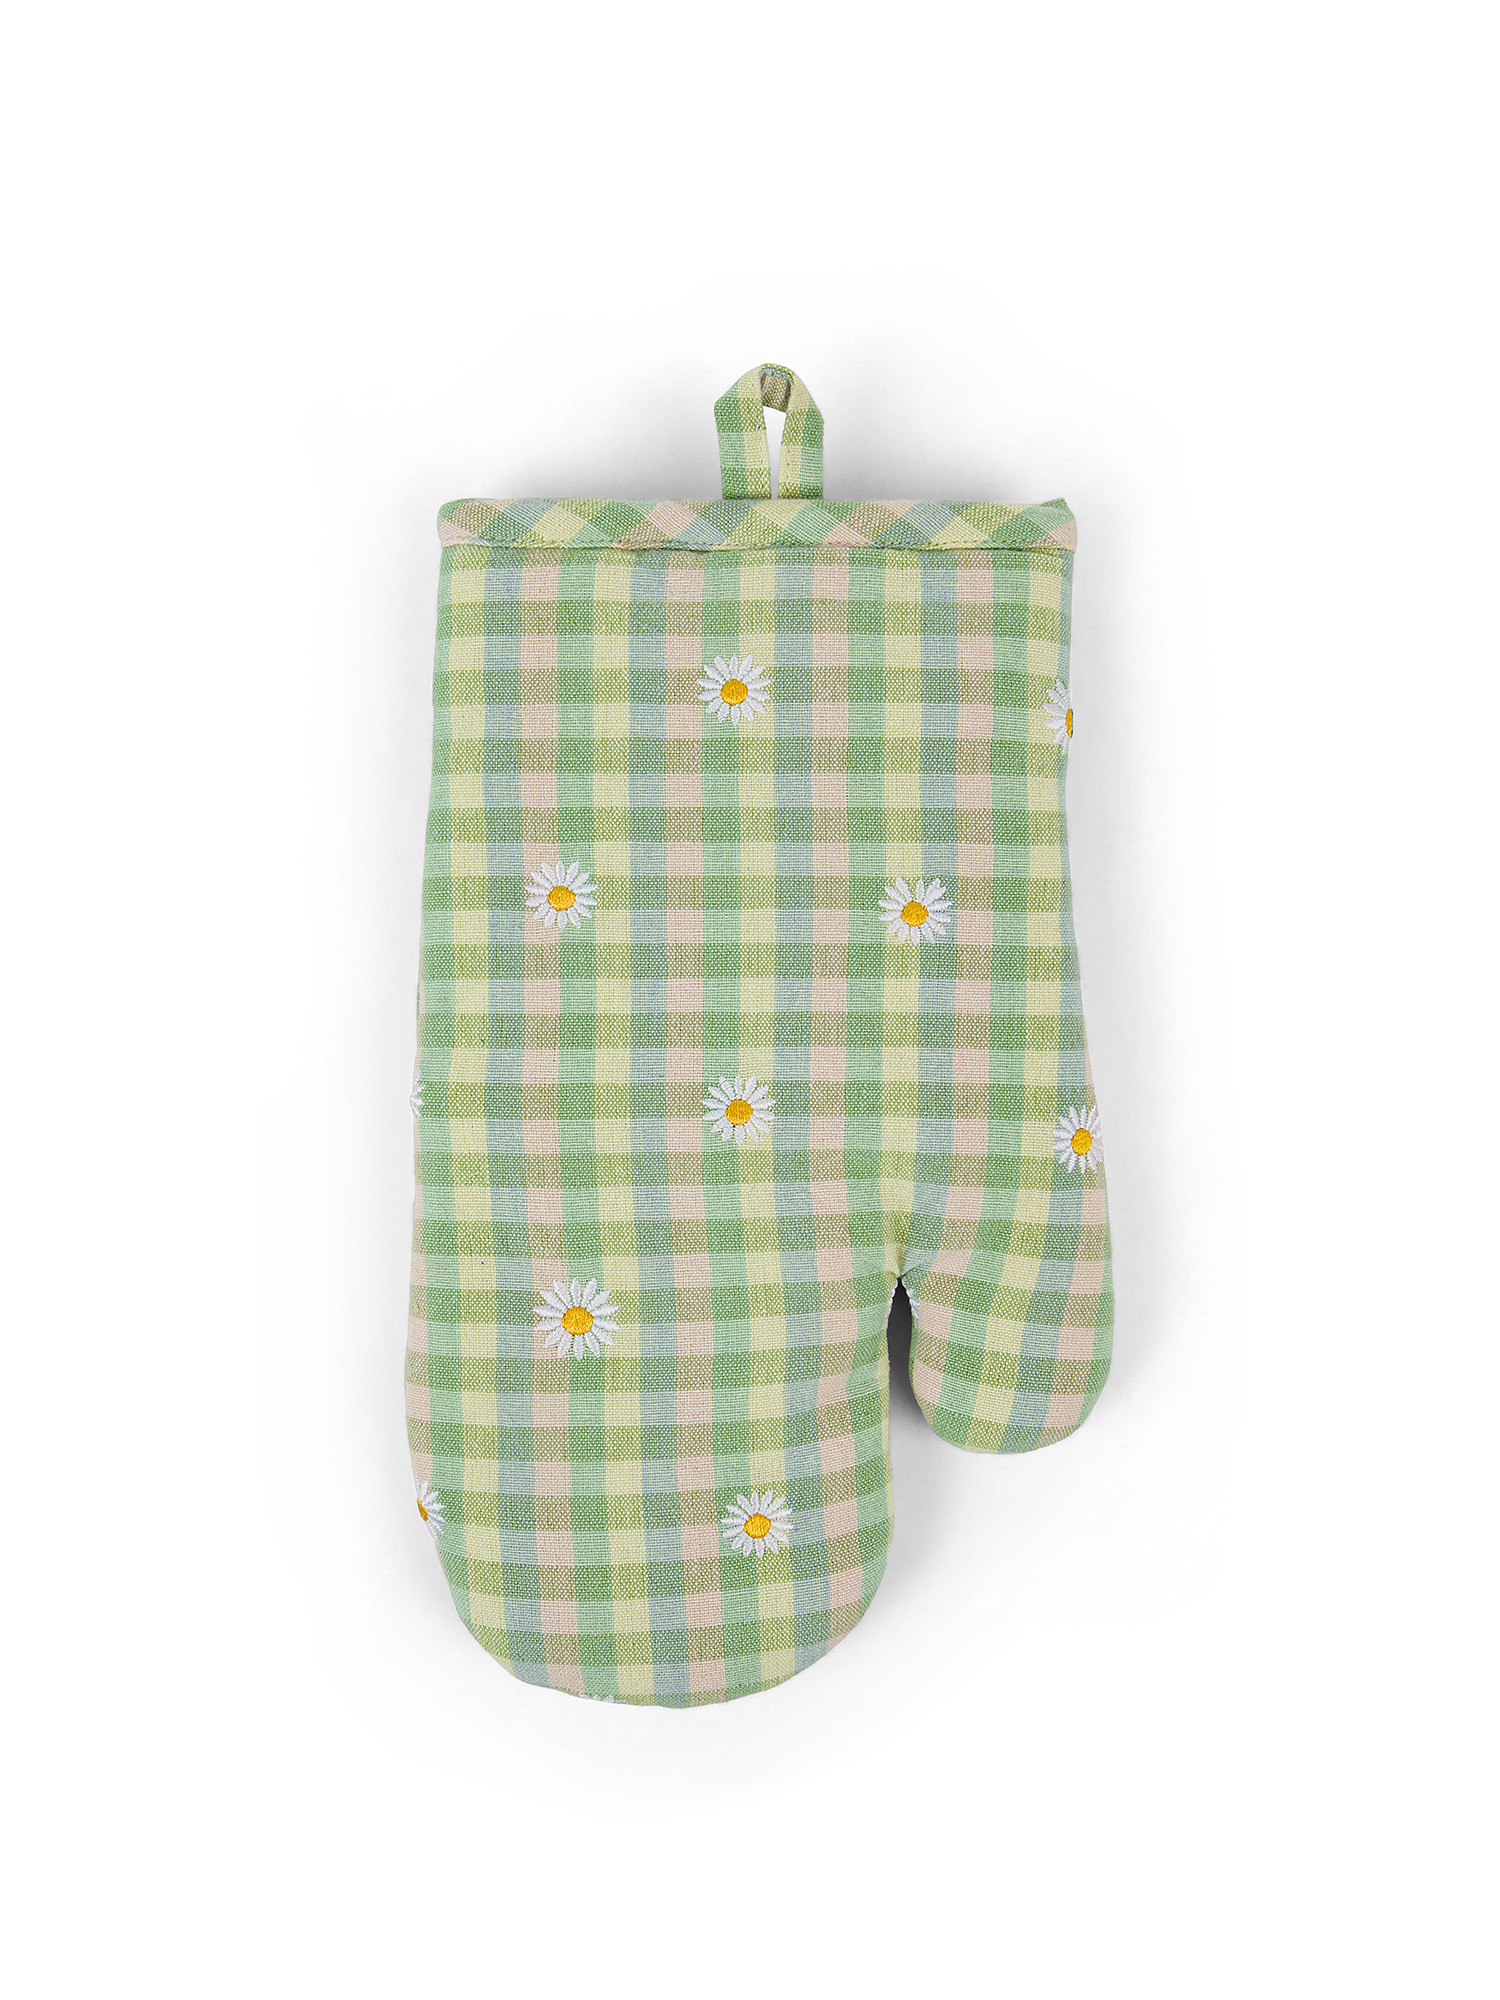 100% cotton kitchen glove with gingham motif and daisies embroidery, Green, large image number 0